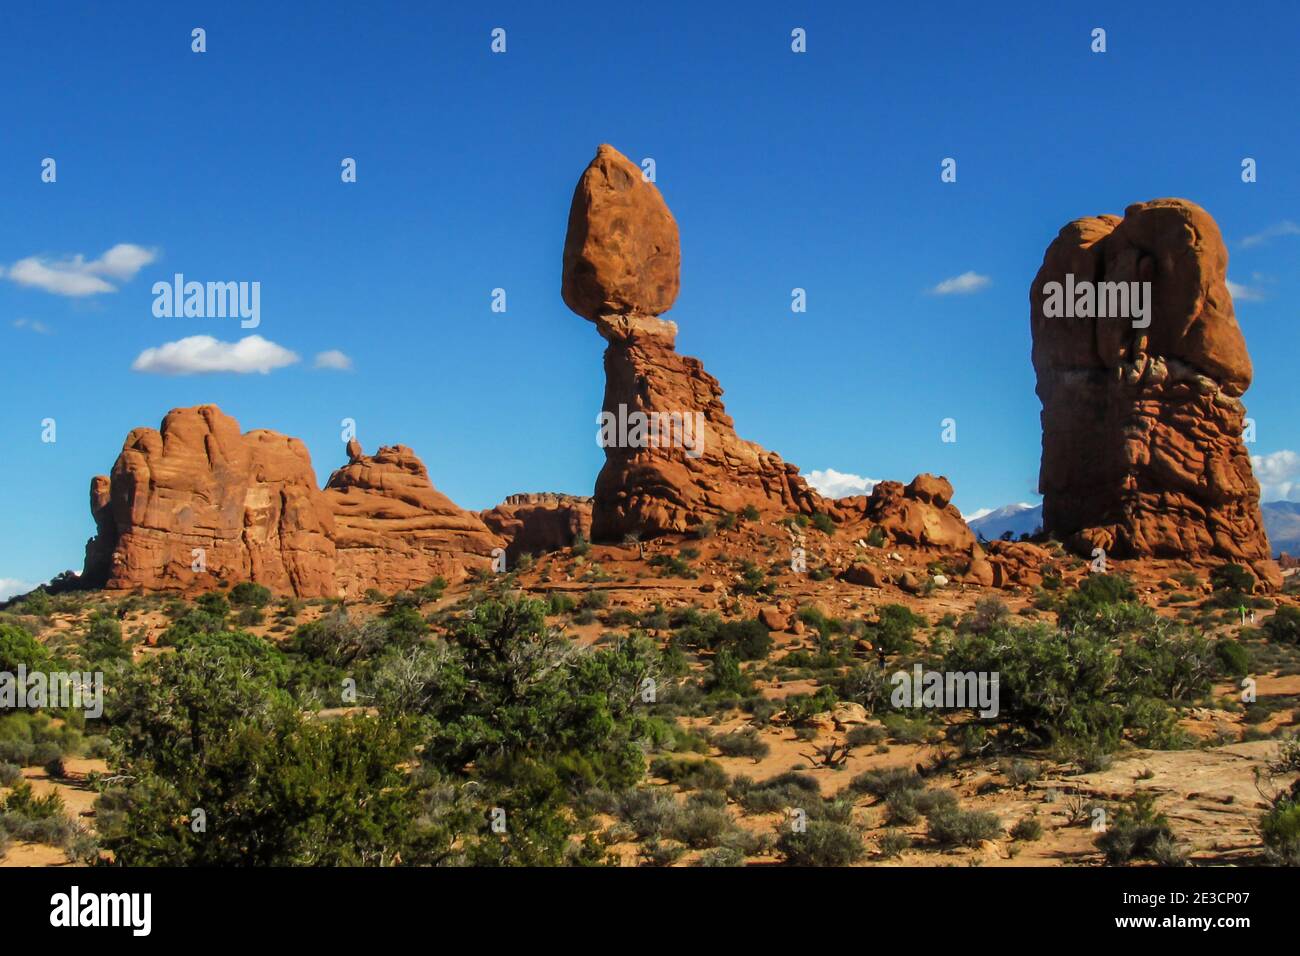 The famous Balancing rock of Archers National Park surrounded by sandstone towers, Utah, USA, on a clear sunny day Stock Photo